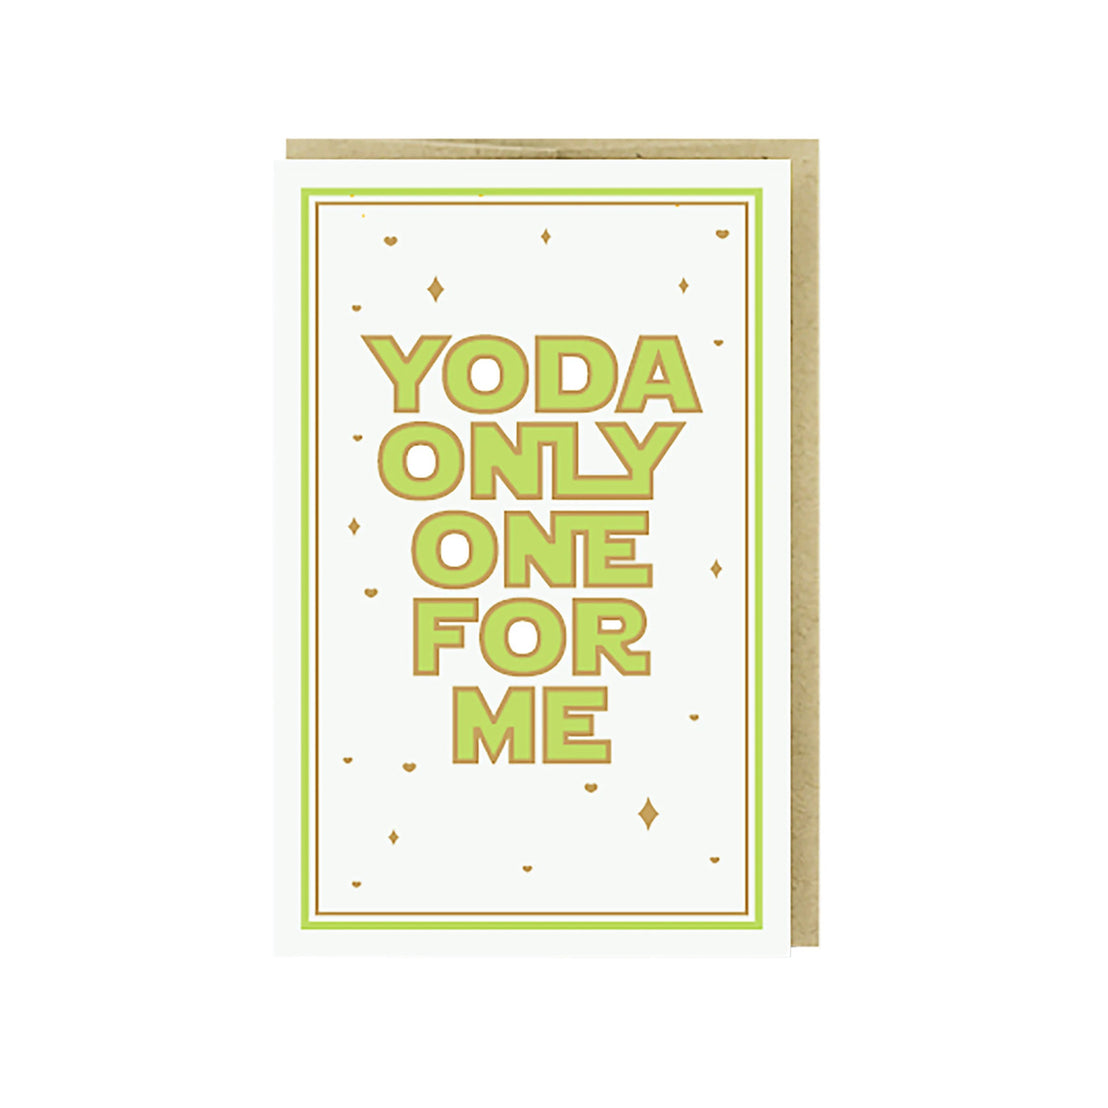 Yoda Only One For Me, Pike Street Press